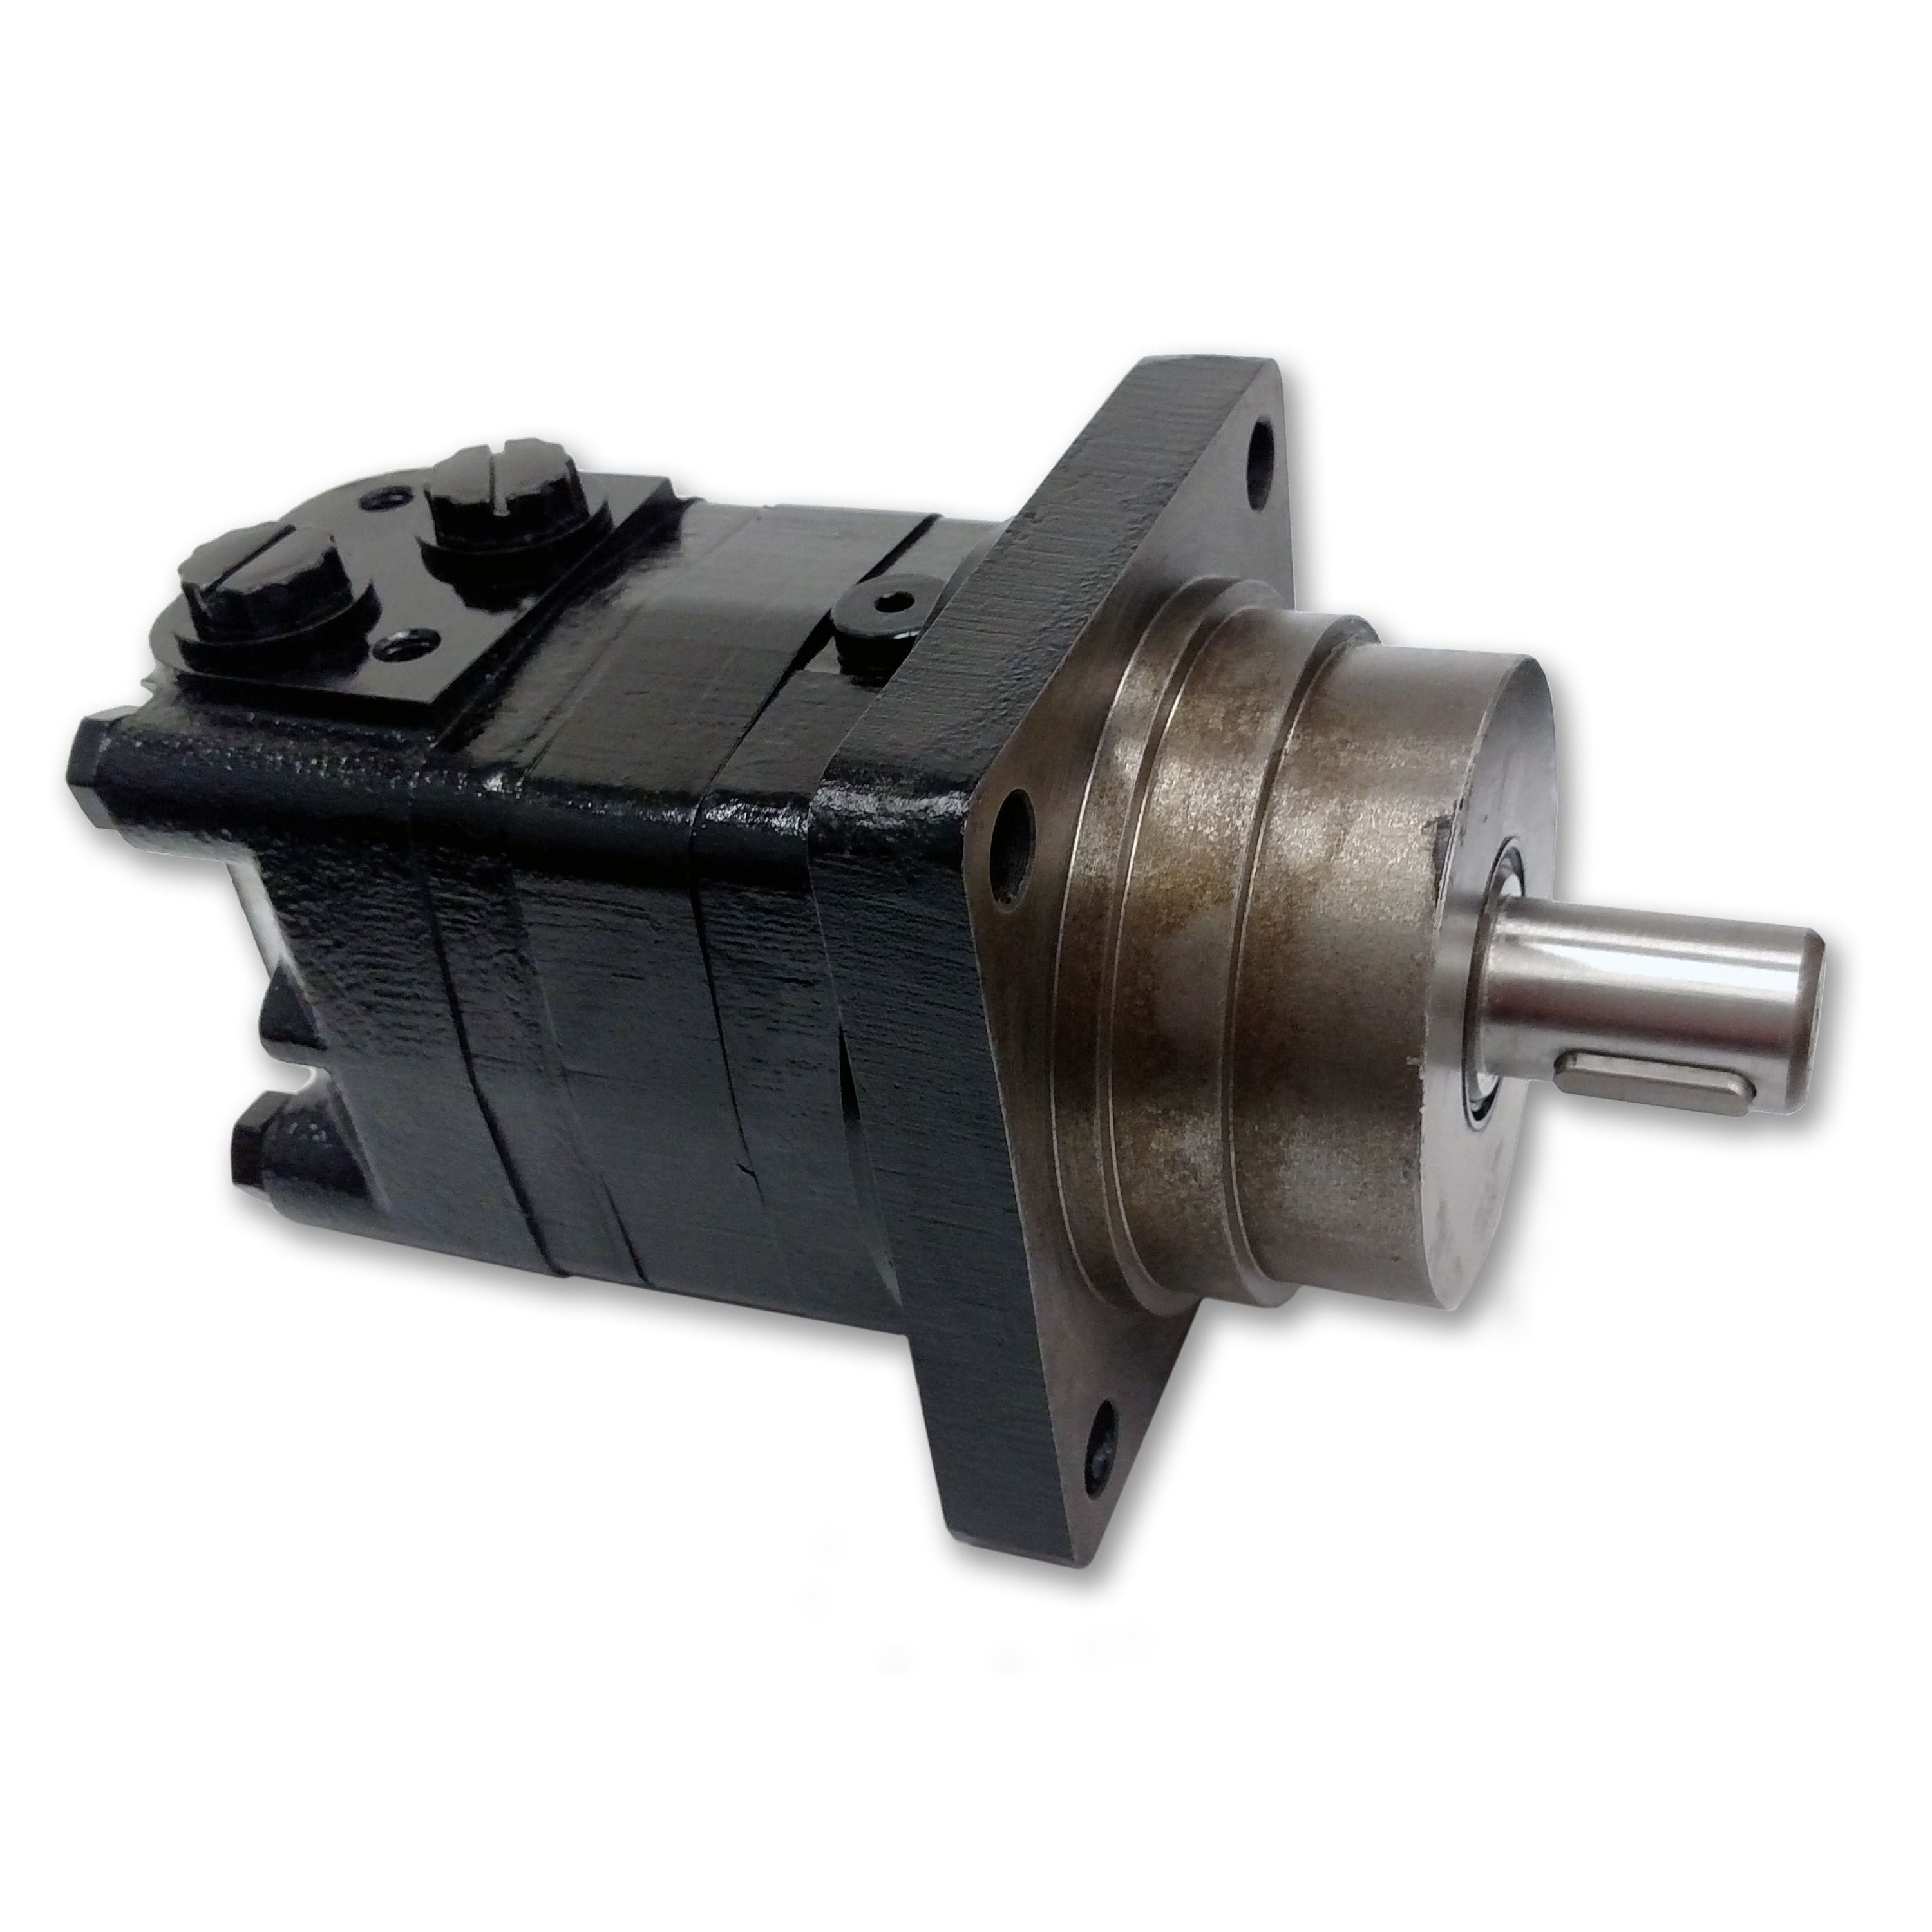 BMSY-100-WE-D-S : Dynamic LSHT Motor, 101cc, 748RPM, 2566in-lb, 2973psi Differential, 19.81GPM, Wheel Mount, 1" Bore x 1/4" Key Shaft, Side Ported, #10 SAE (5/8")